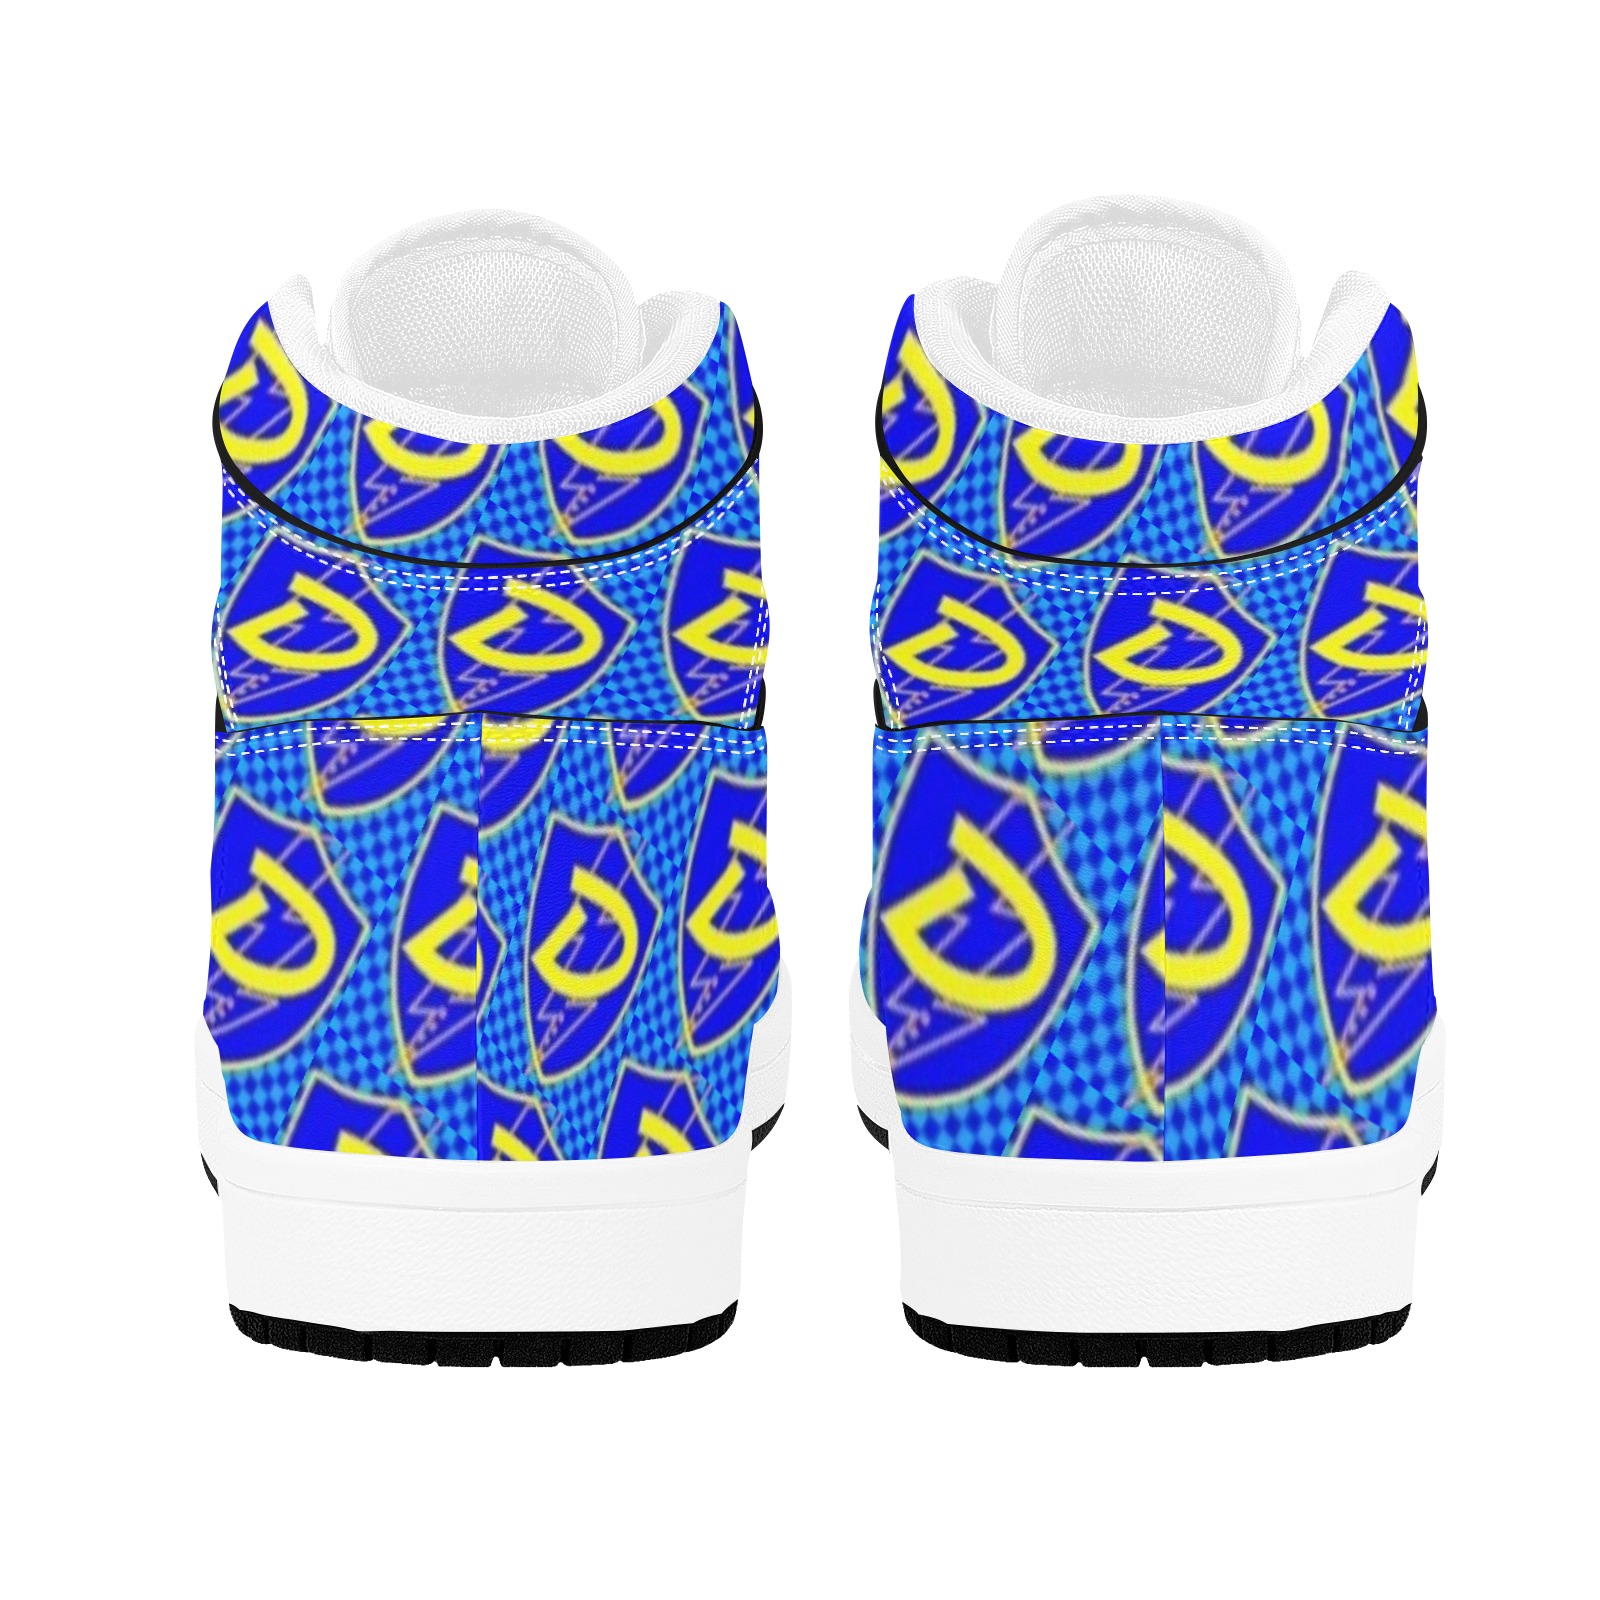 DIONIO - Blue & Yellow Repeat D Shield Logo Leather Sneakers Unisex High Top Sneakers (Model 20042)